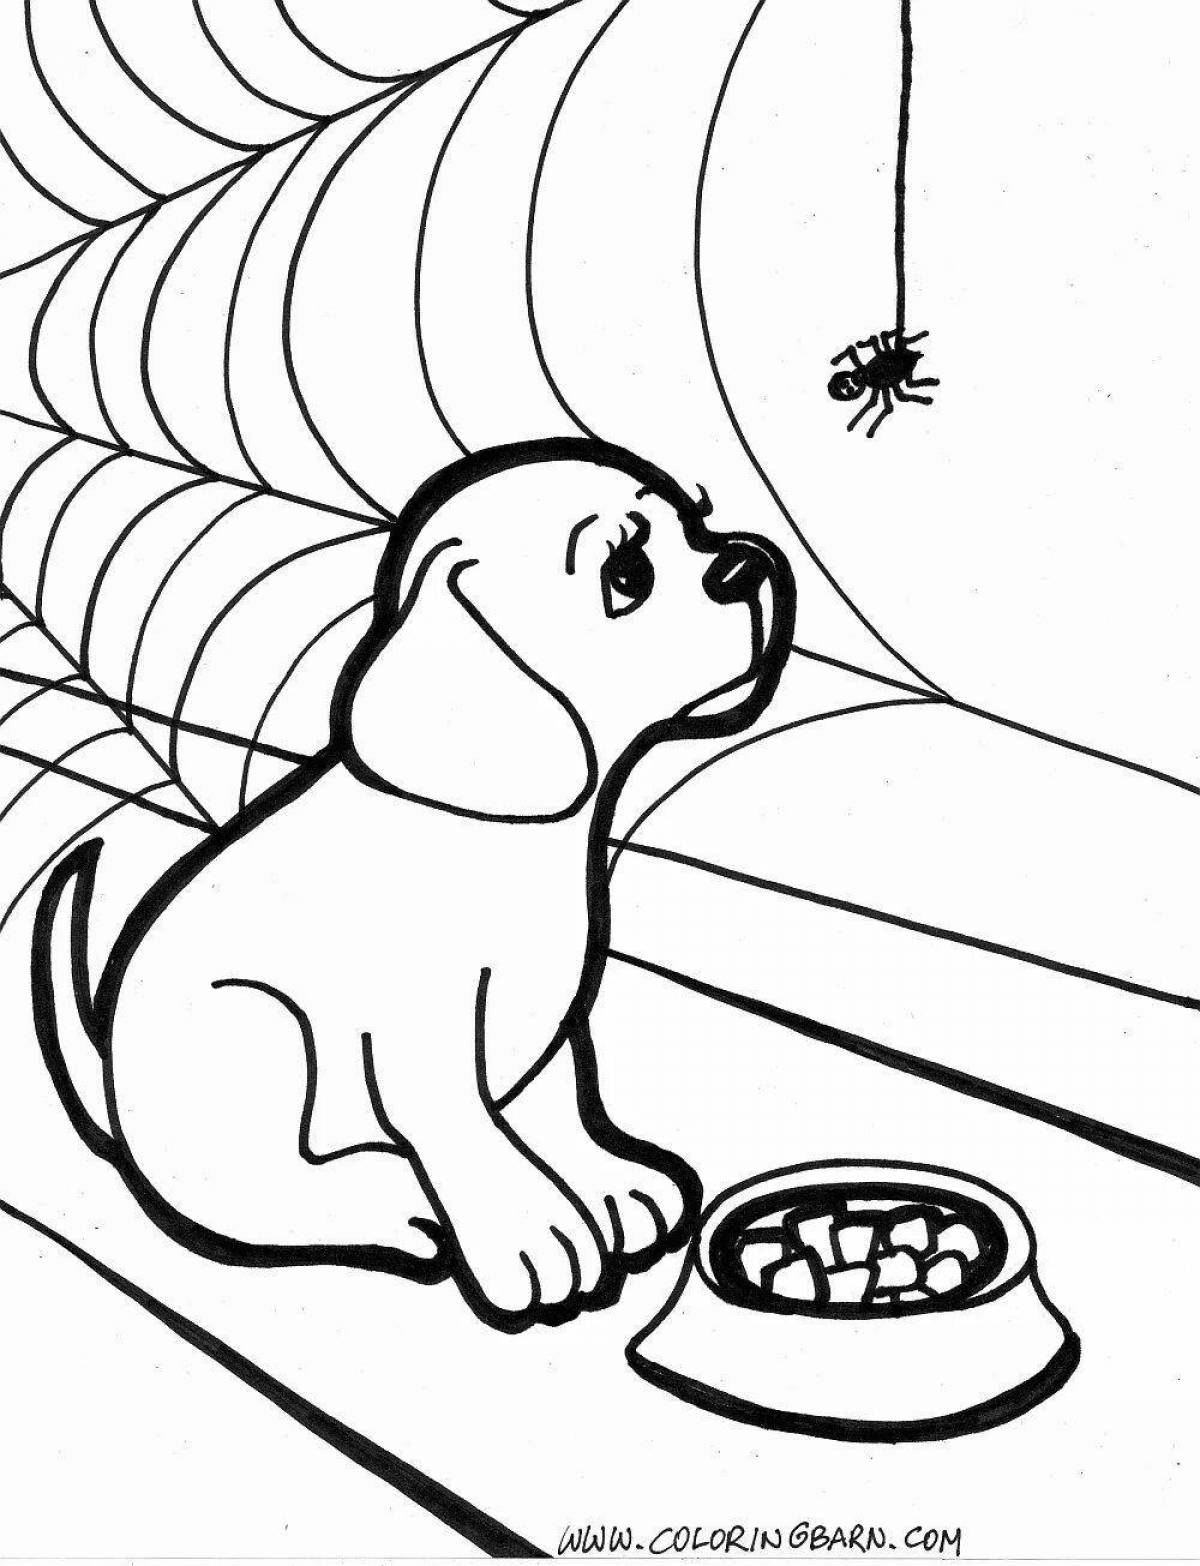 Amazing coloring page my puppy Mikhalkov for kids